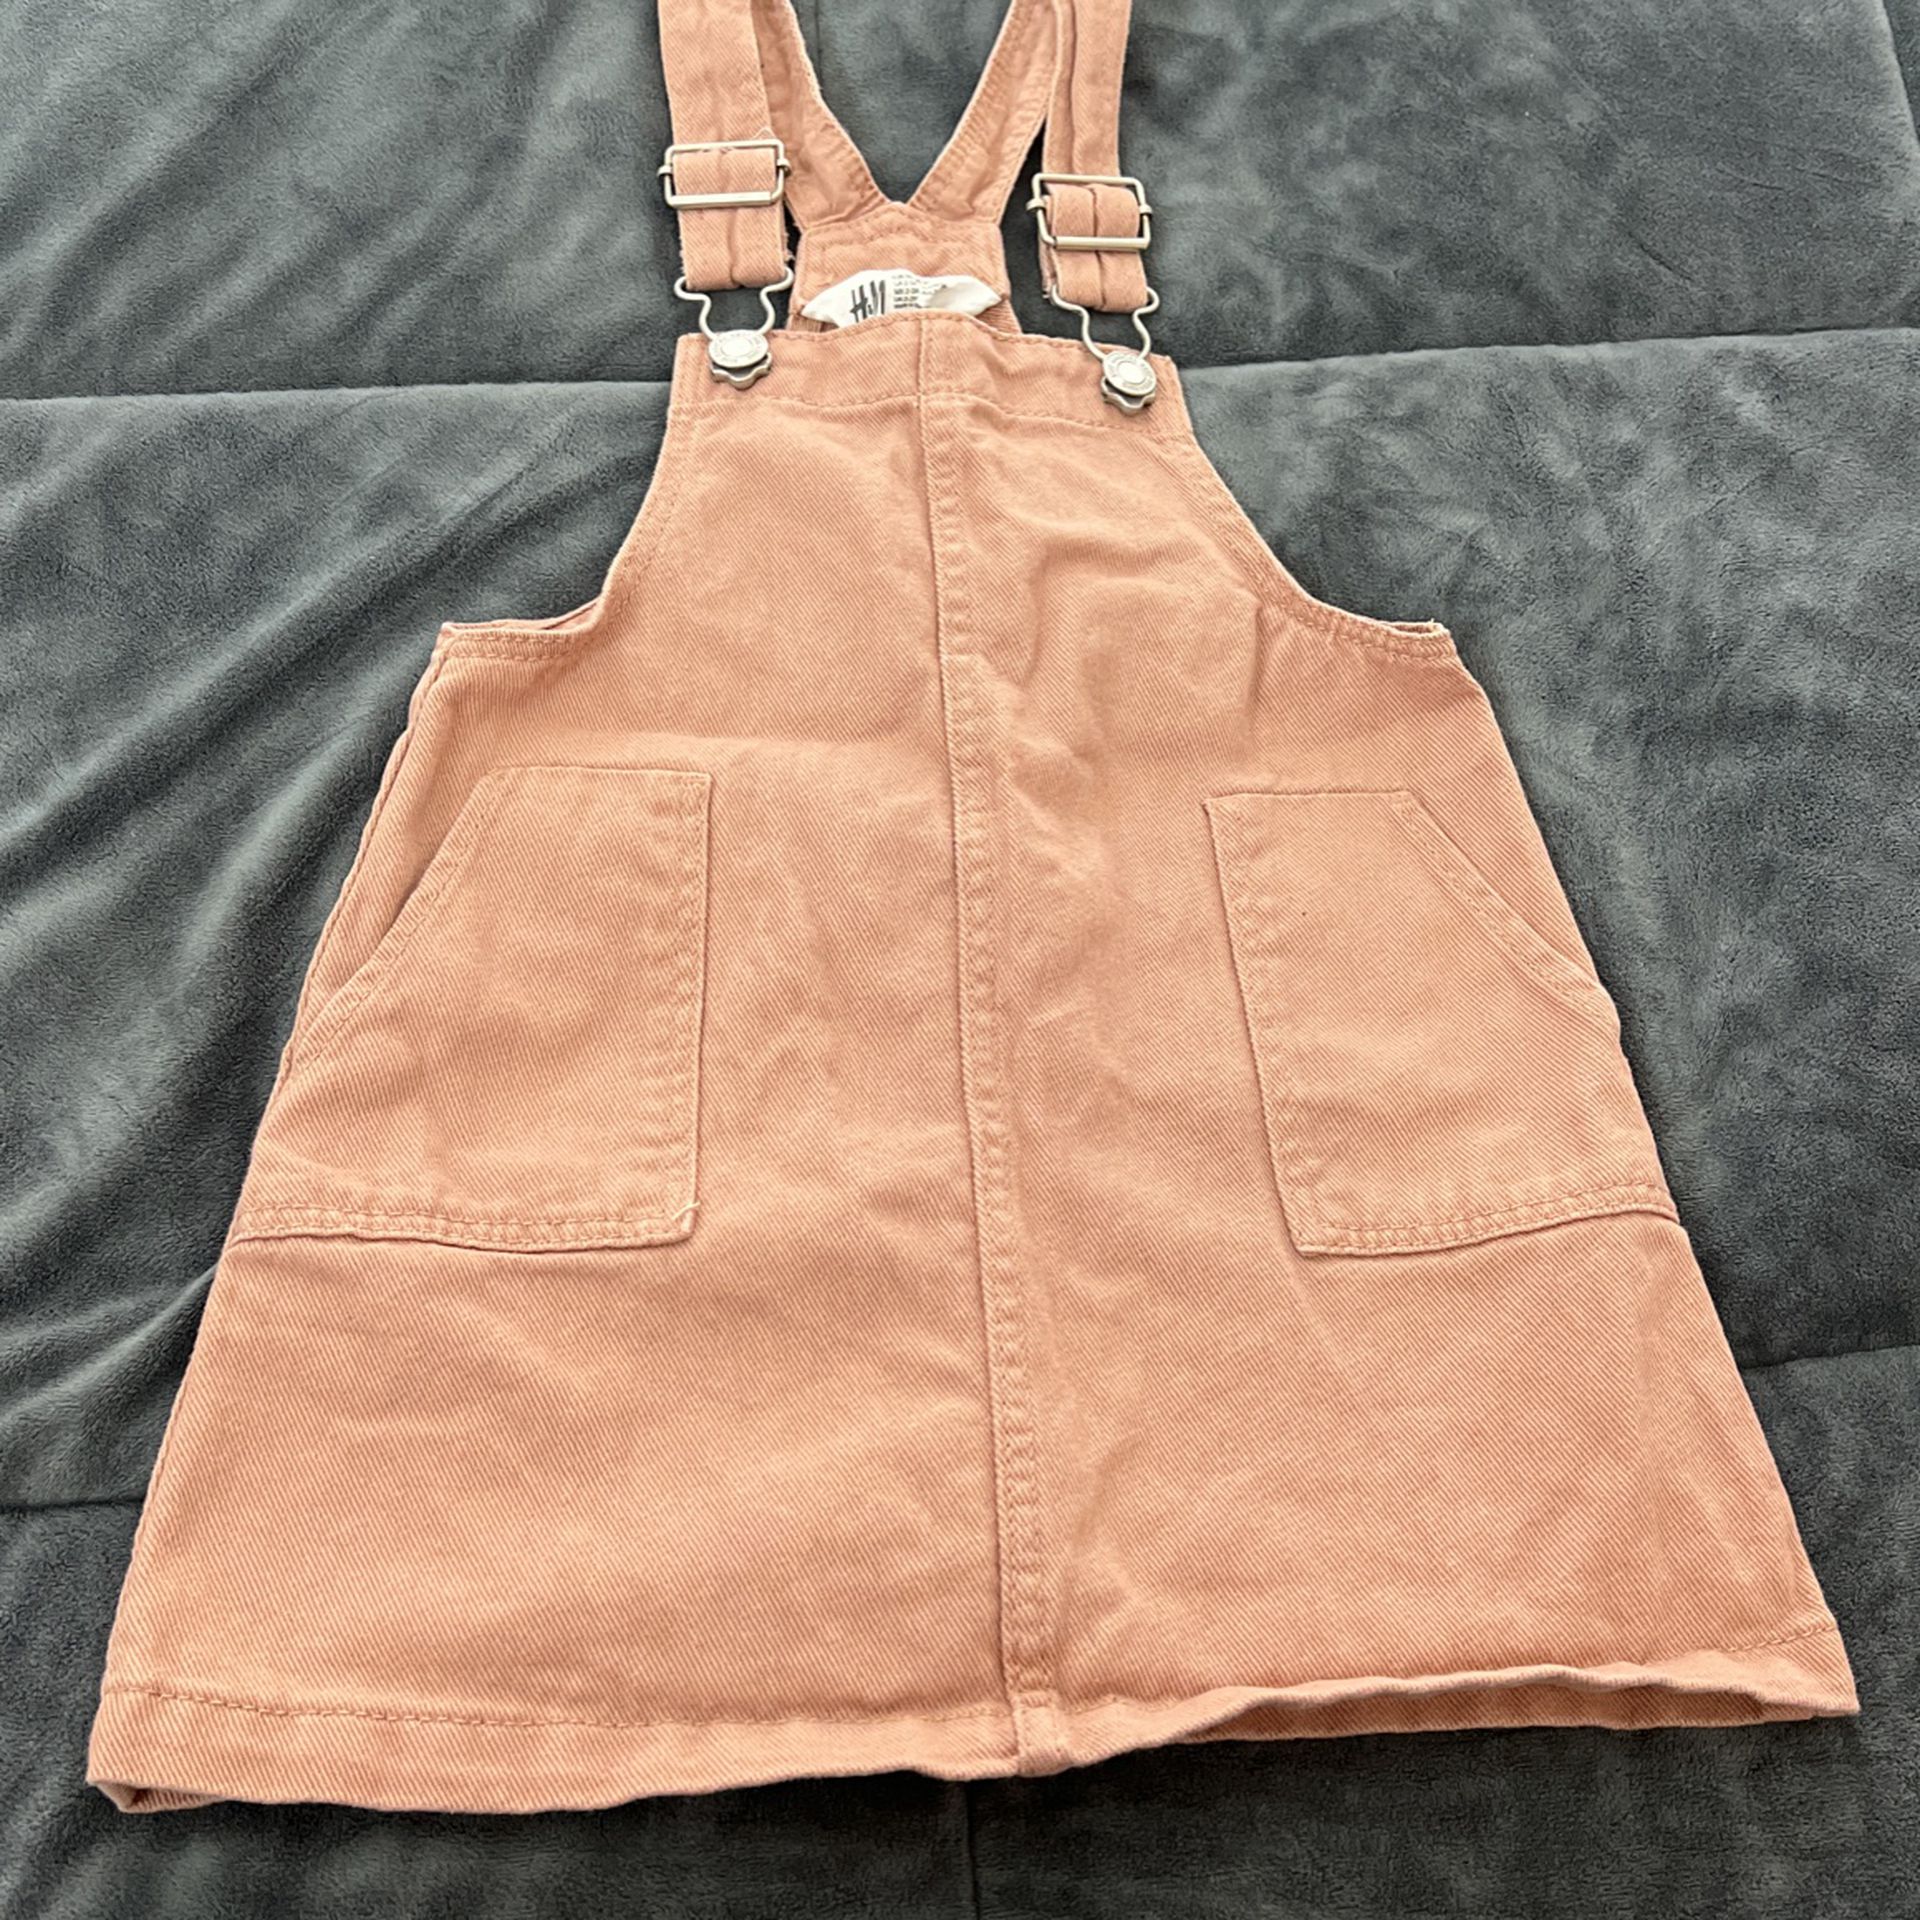 Toddler Overall Dress 